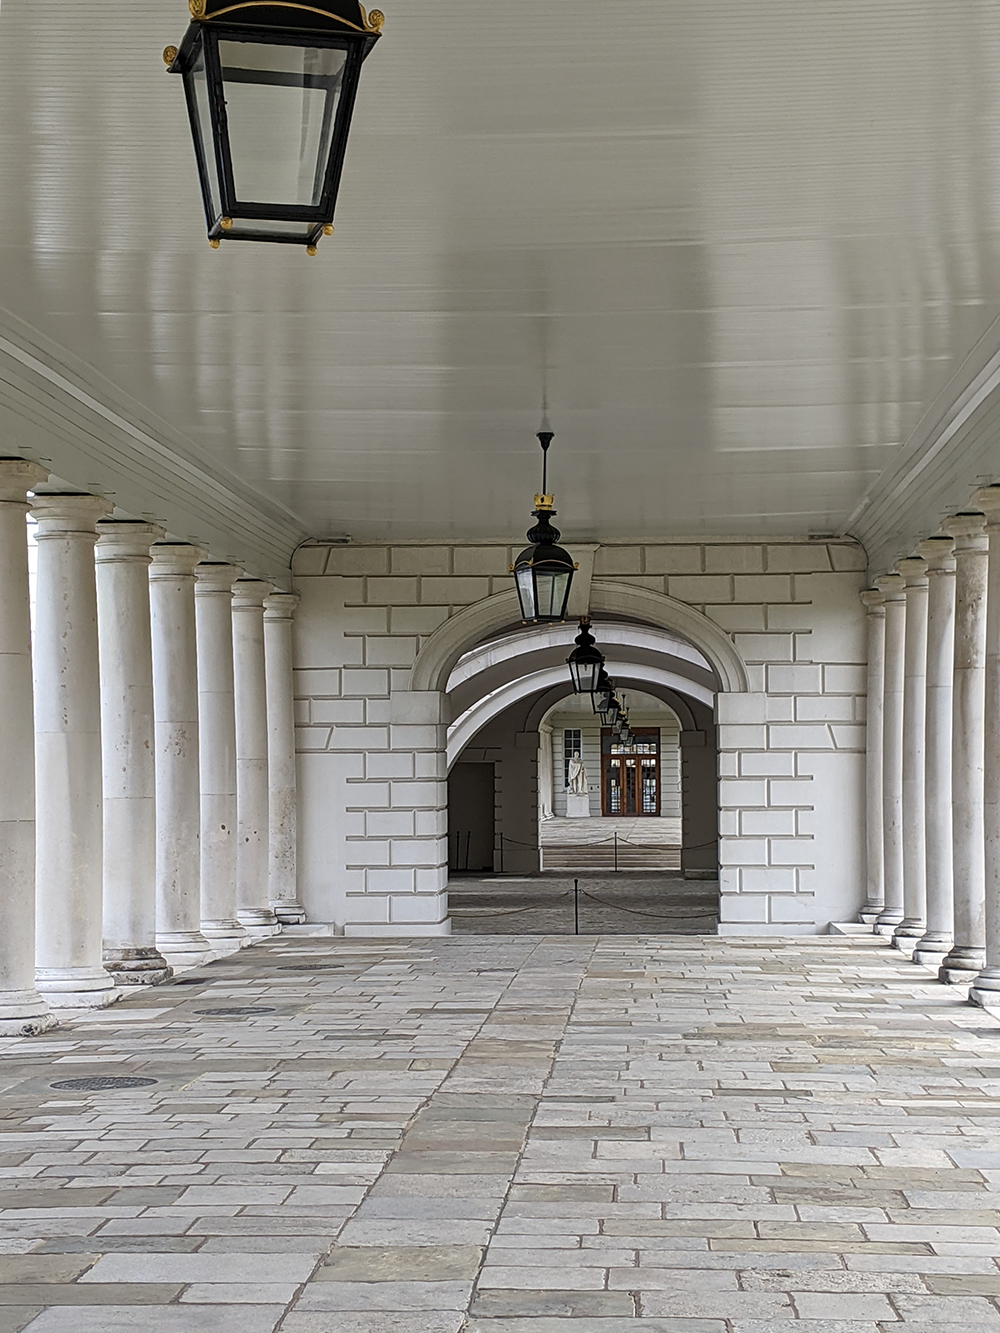 My photo of the Queen's House Colonade in Greenwich.